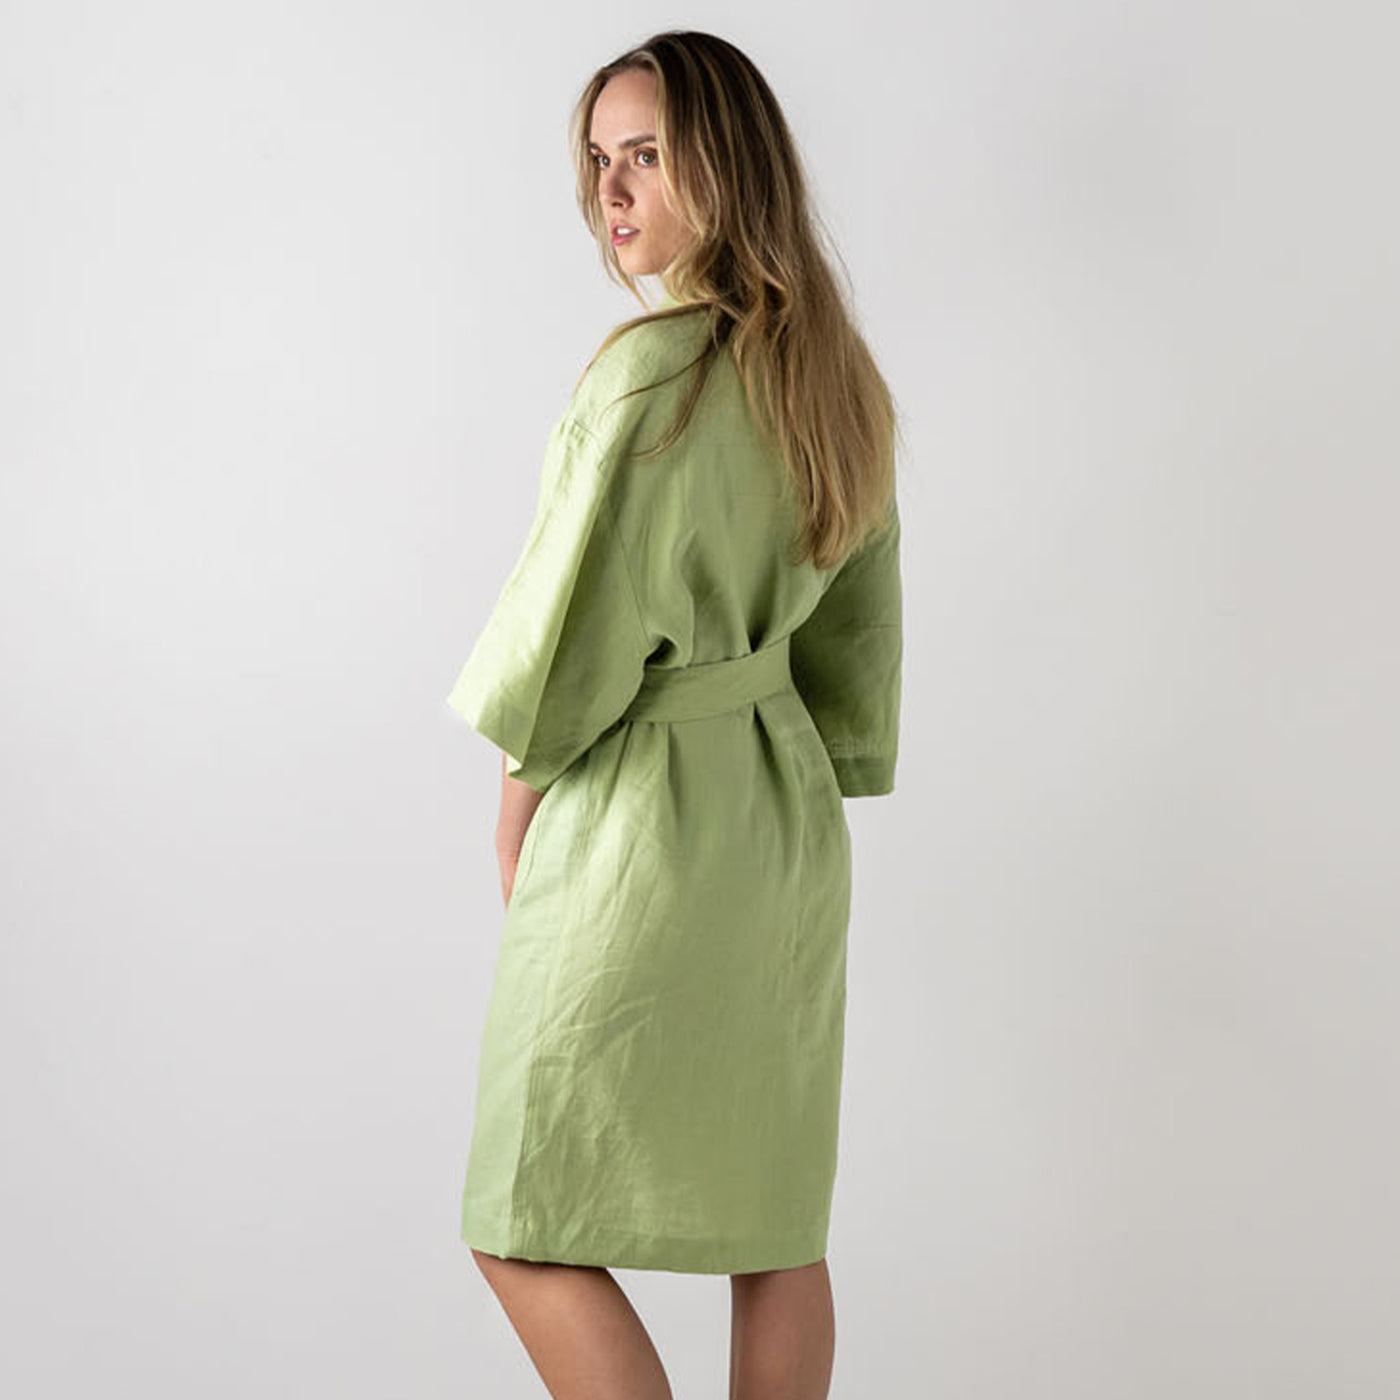 French Flax Linen Robe in Matcha